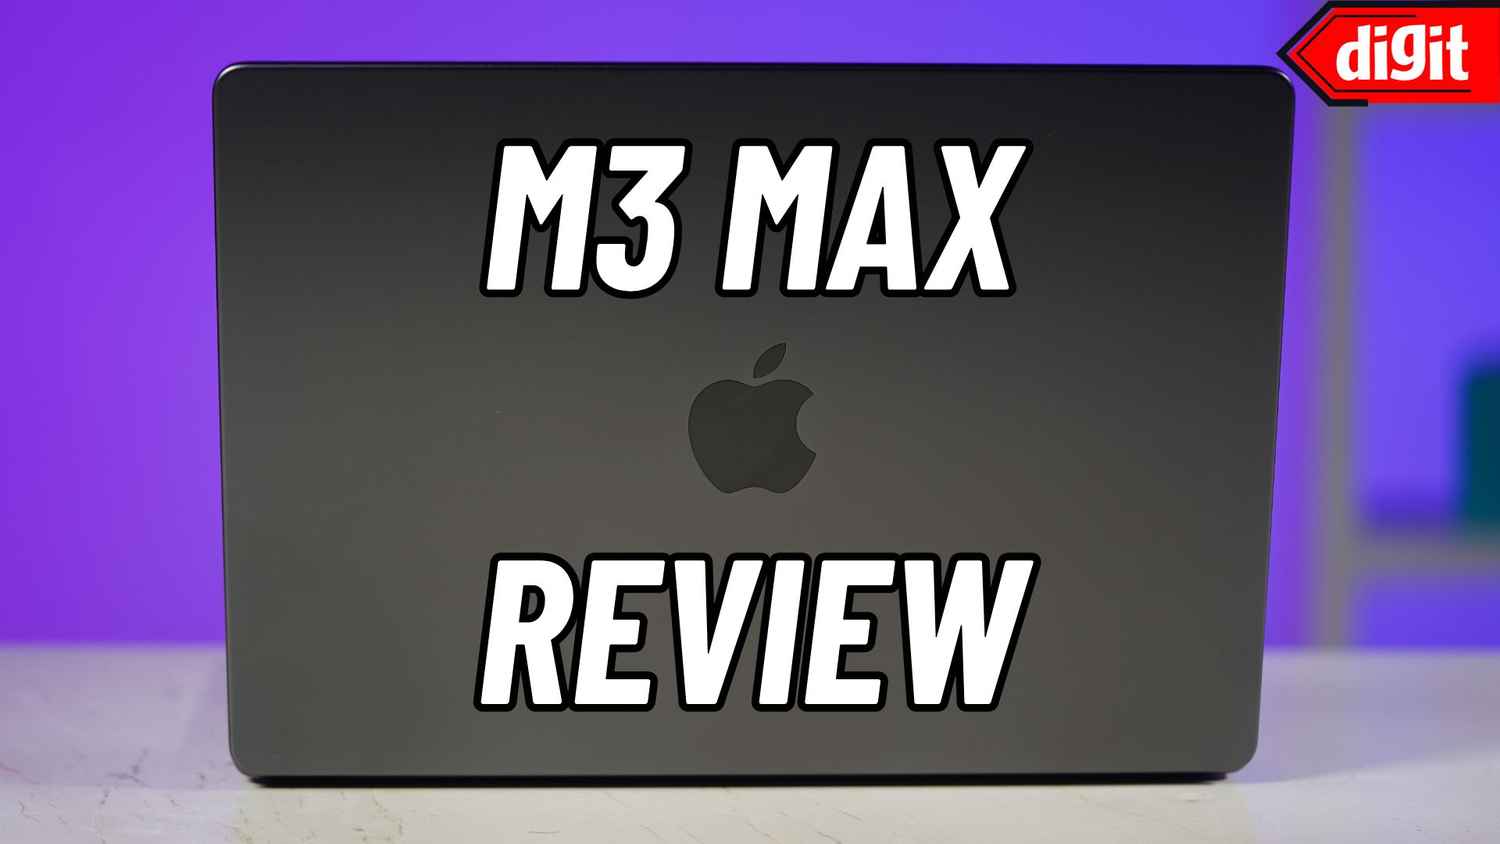 Apple 14-inch MacBook Pro Performance Review: Can M3 Max Game Without Throttling?